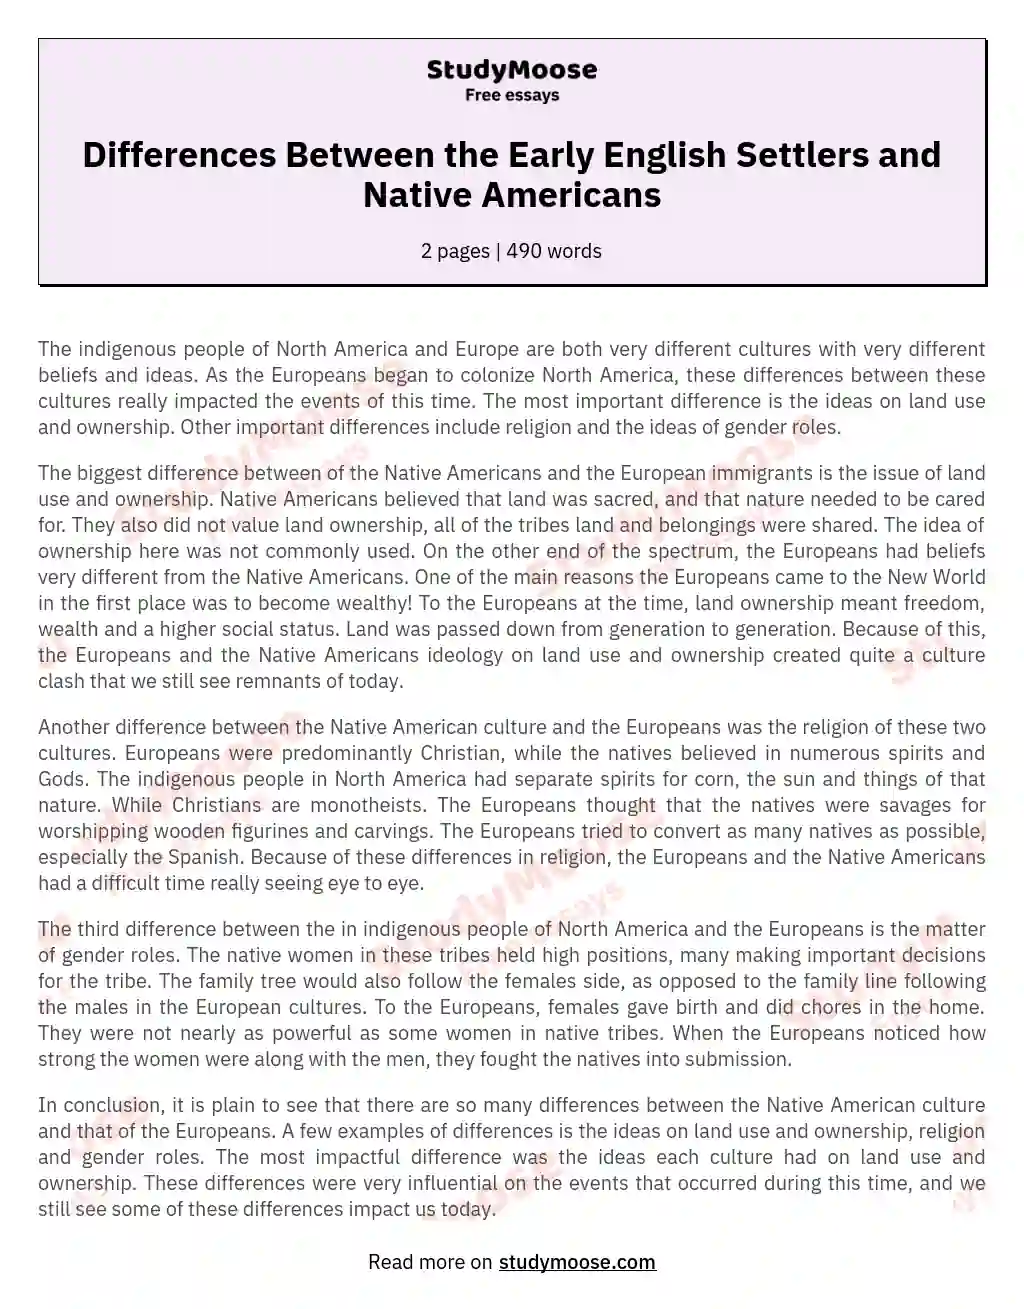 Differences Between the Early English Settlers and Native Americans essay